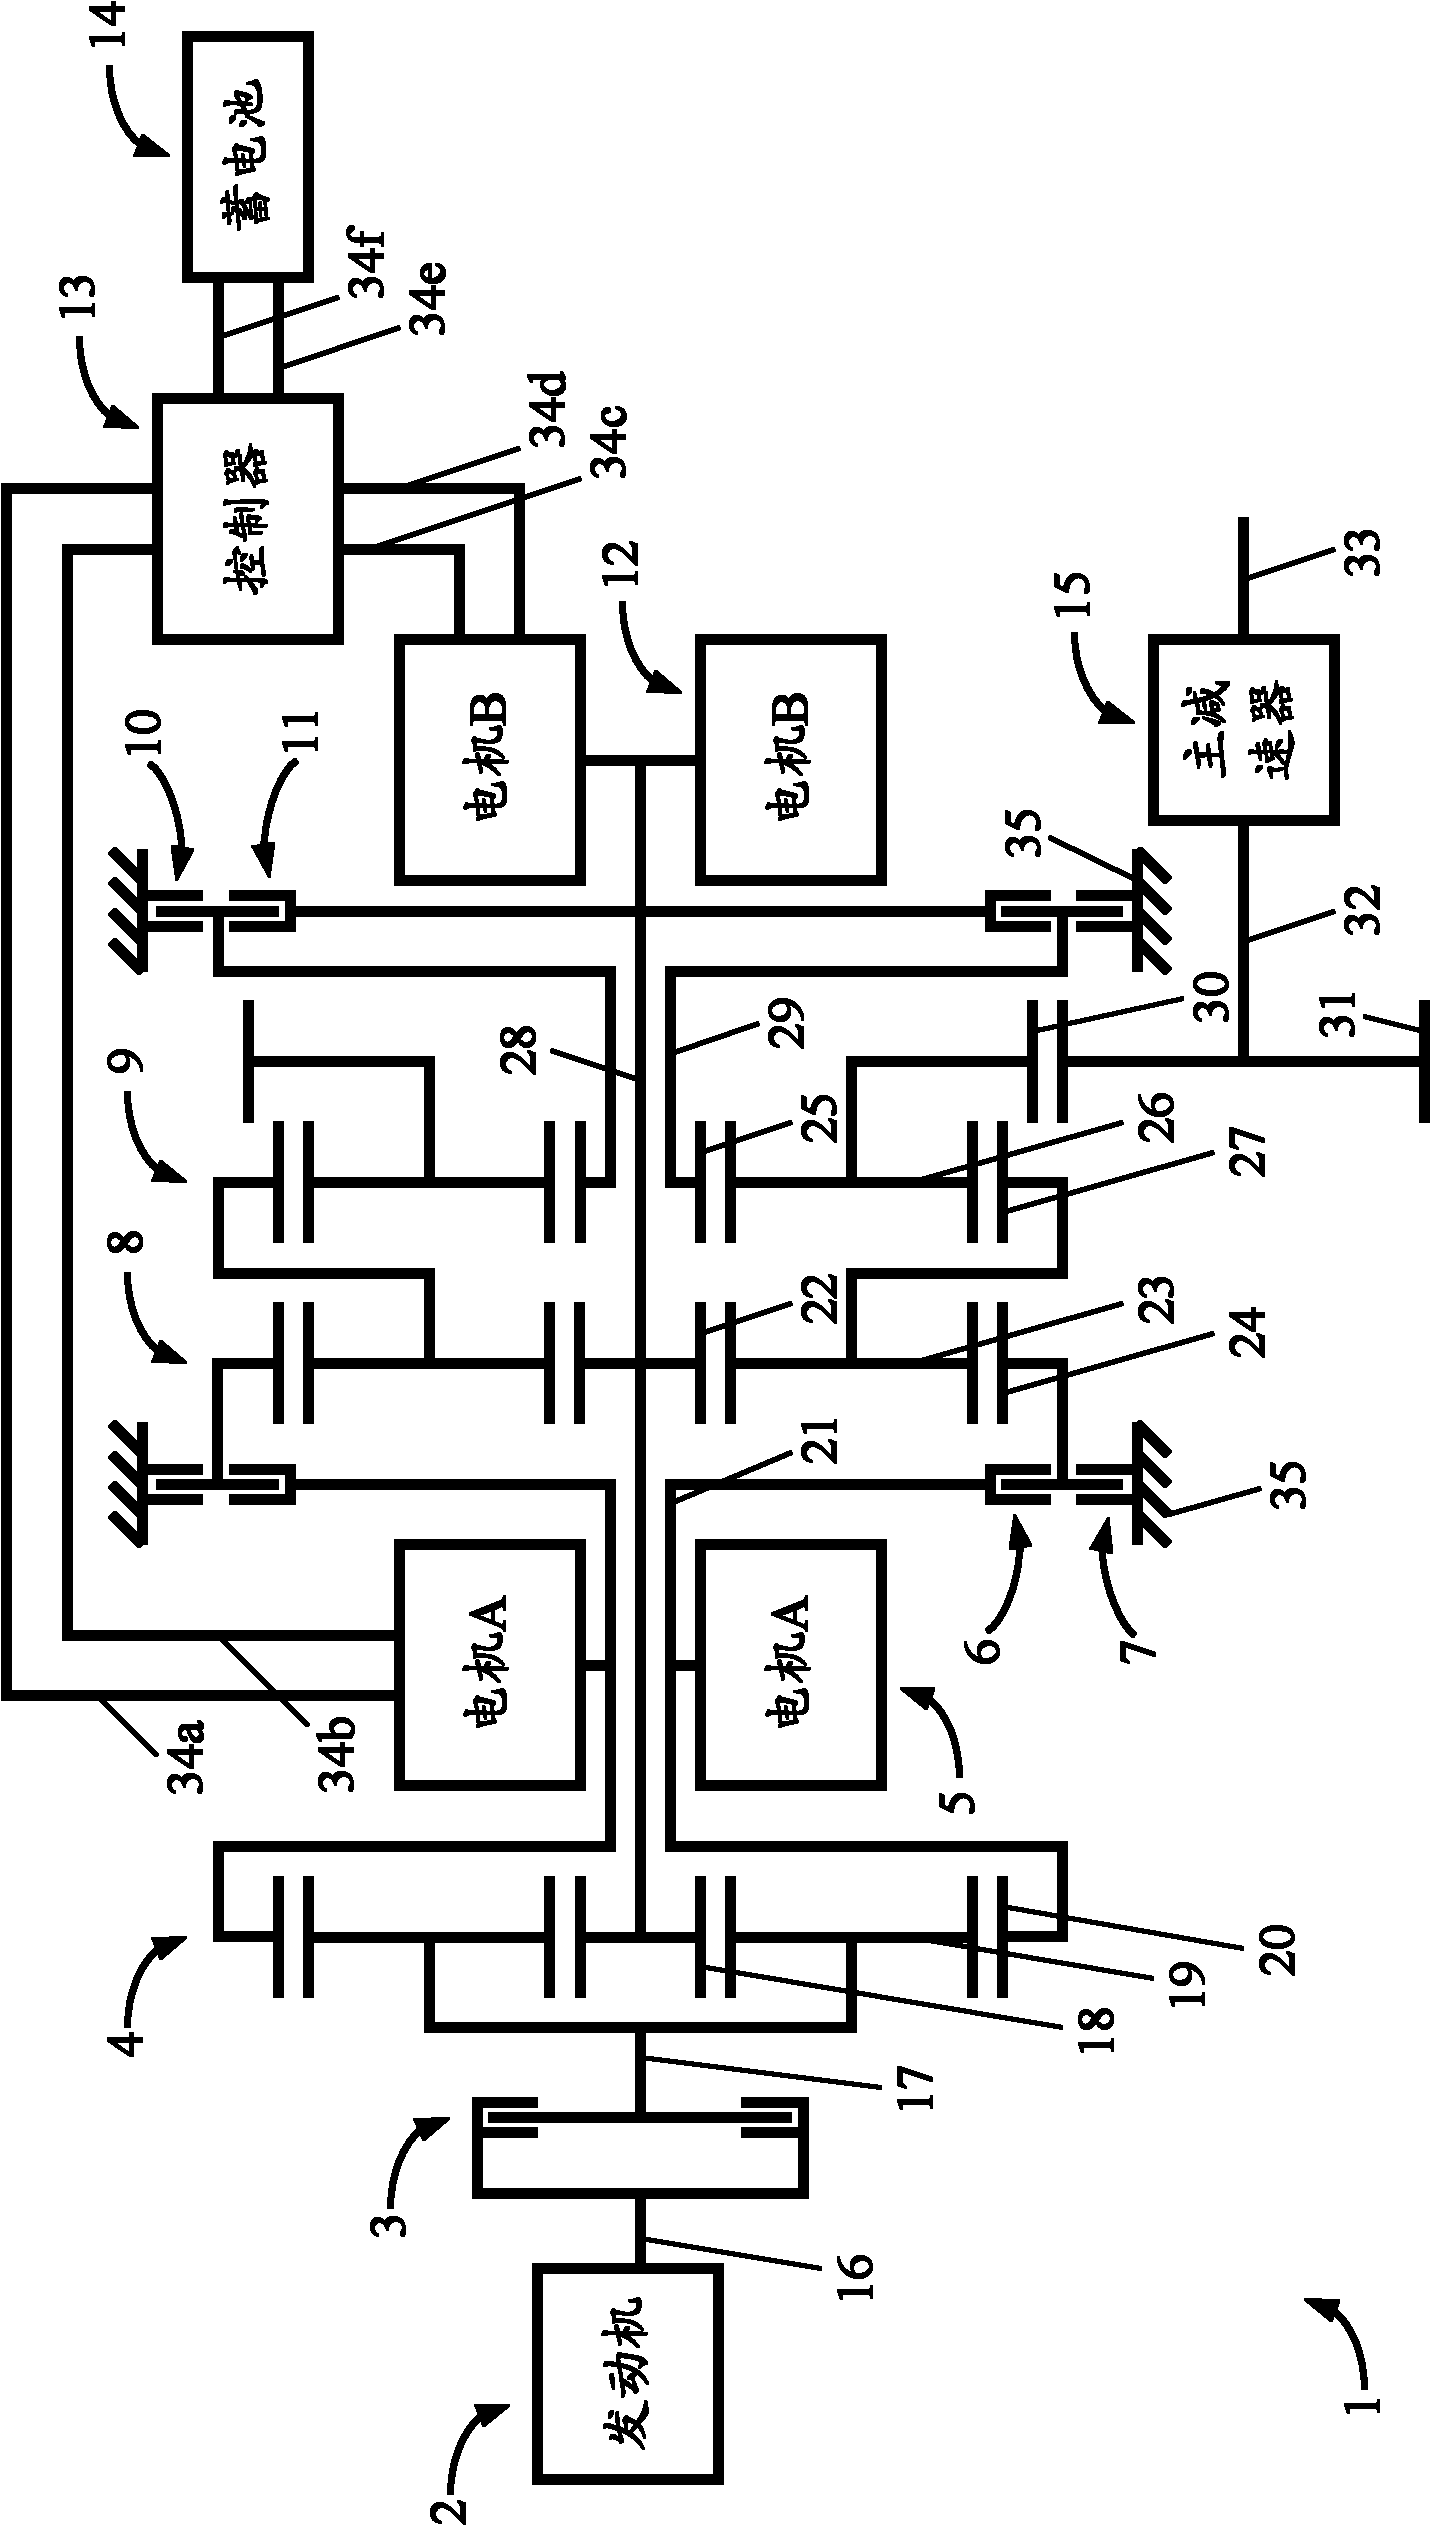 Three-mode power transmission device for hybrid vehicle